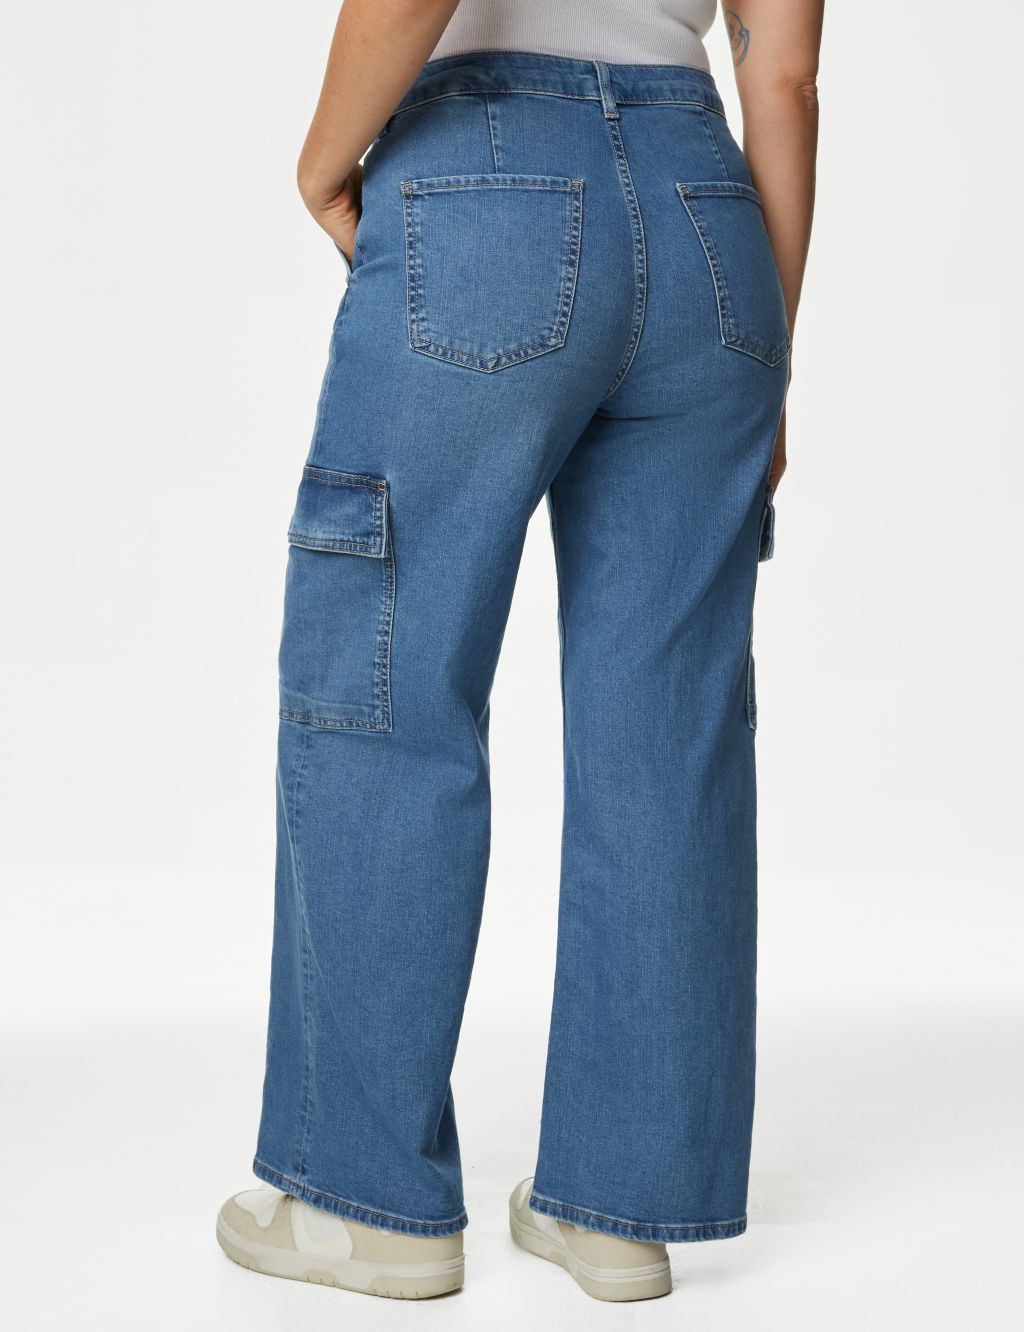 High Waisted Wide Leg Cargo Jeans image 6